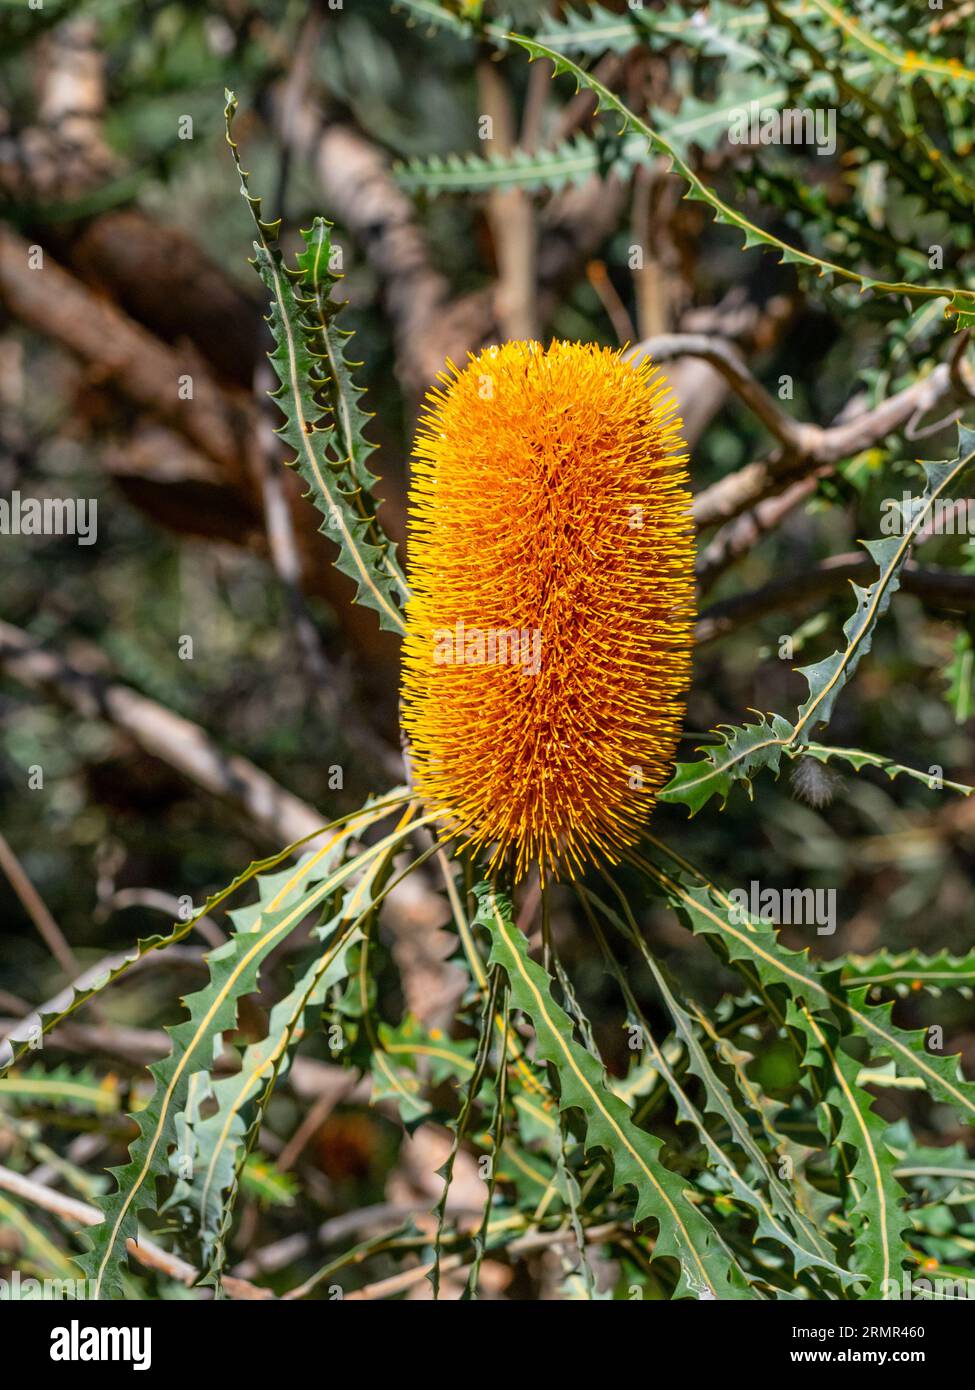 Banksia ashbyi, commonly known as Ashby's banksia, is a species of shrub or small tree that is endemic to Western Australia. Stock Photo